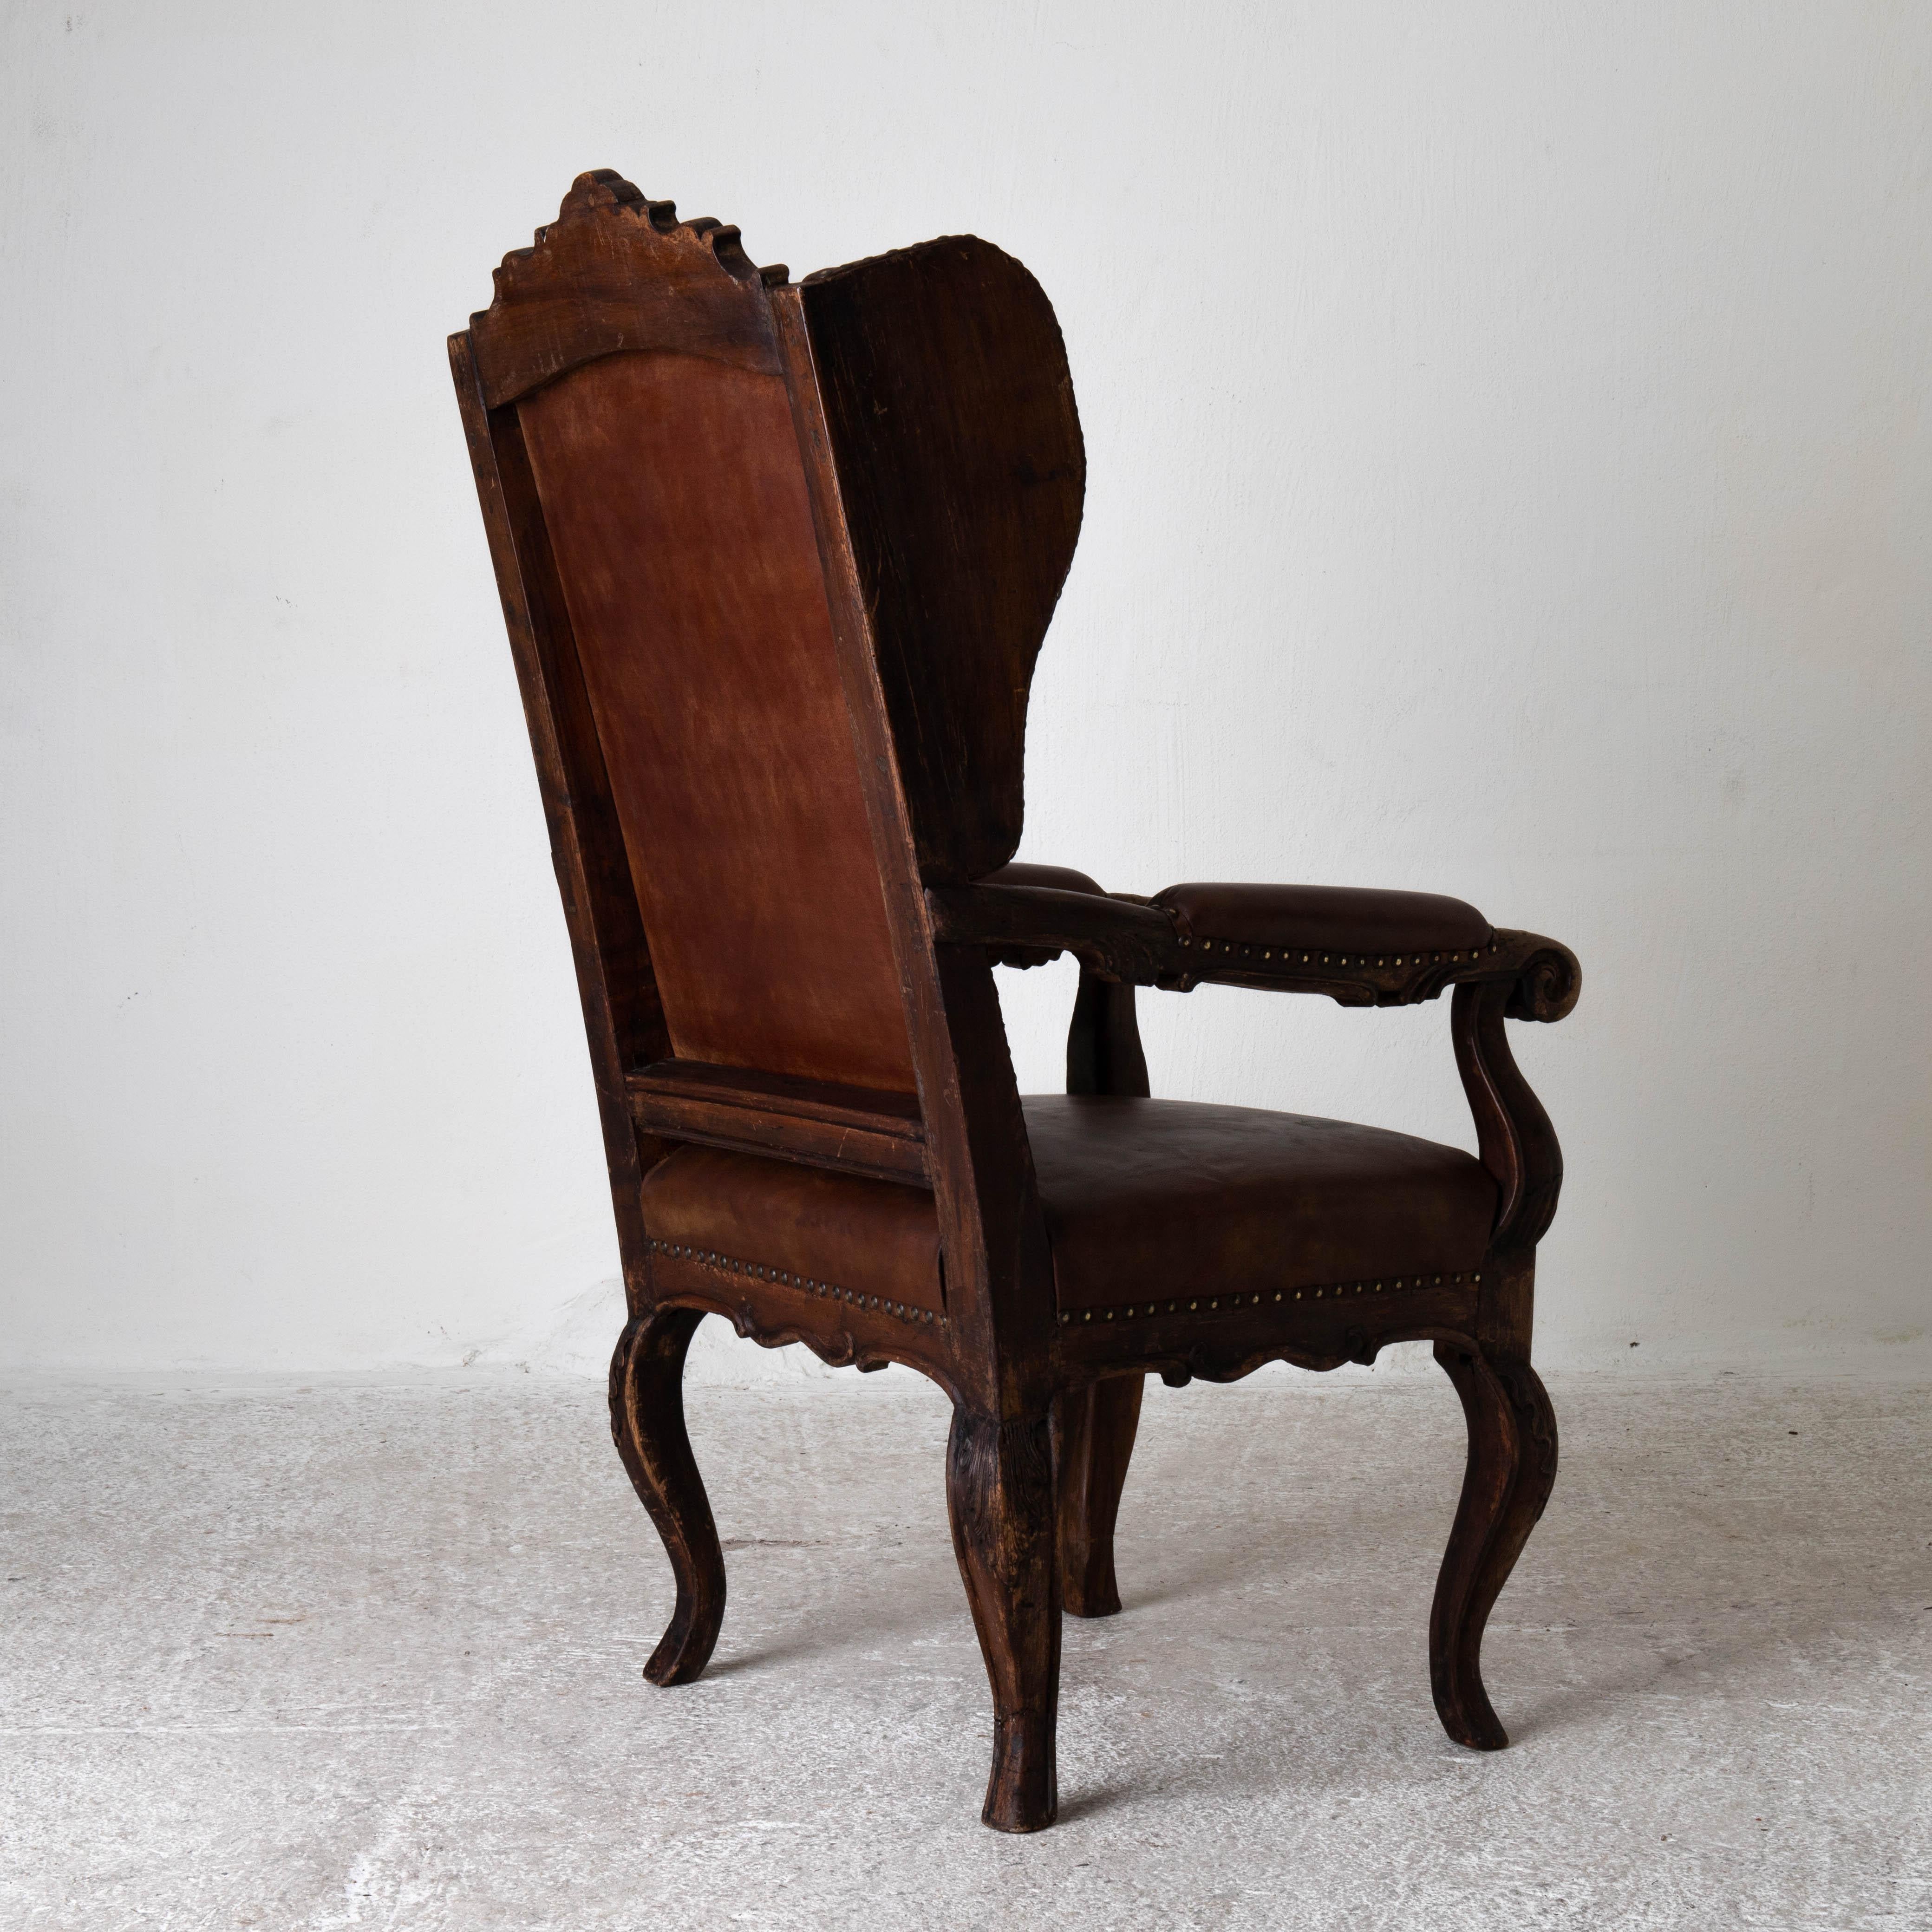 Wood Chair Wingback Swedish Rococo Period 1750-1775 Brown Leather Sweden For Sale